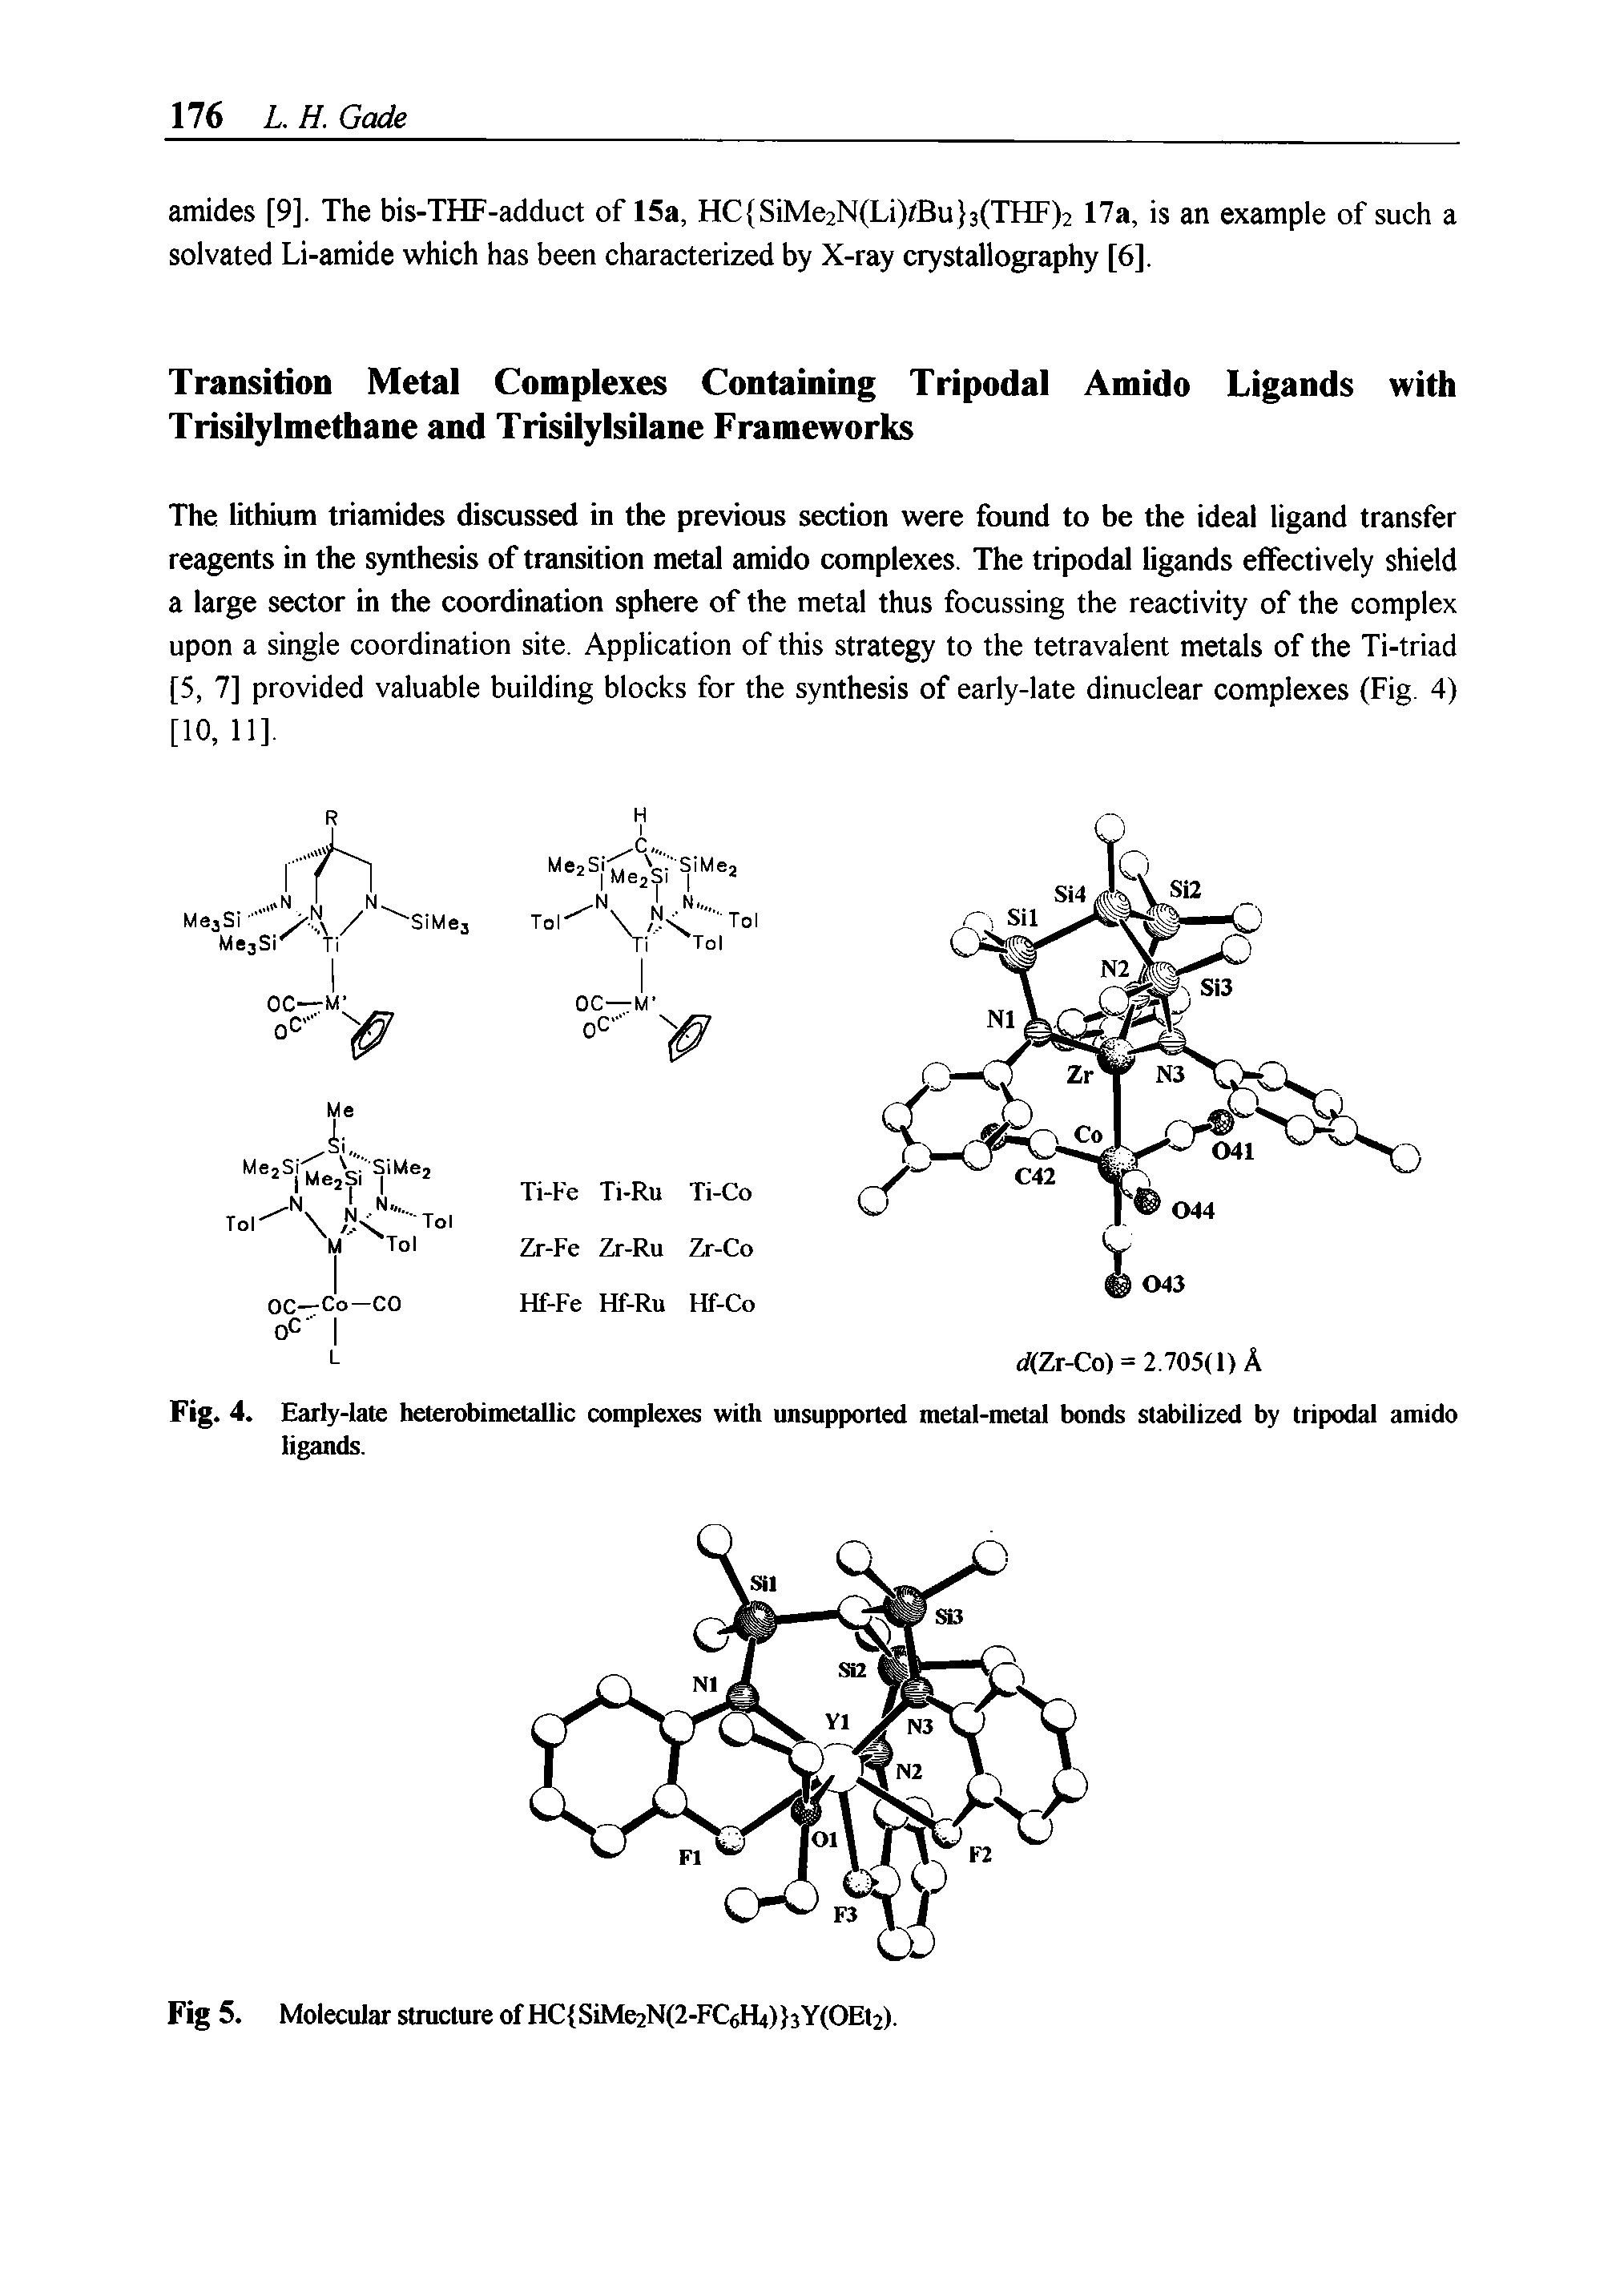 Fig. 4. Early-late heterobimetallic complexes with unsupported metal-metal bonds stabilized by tripodal amido ligands.